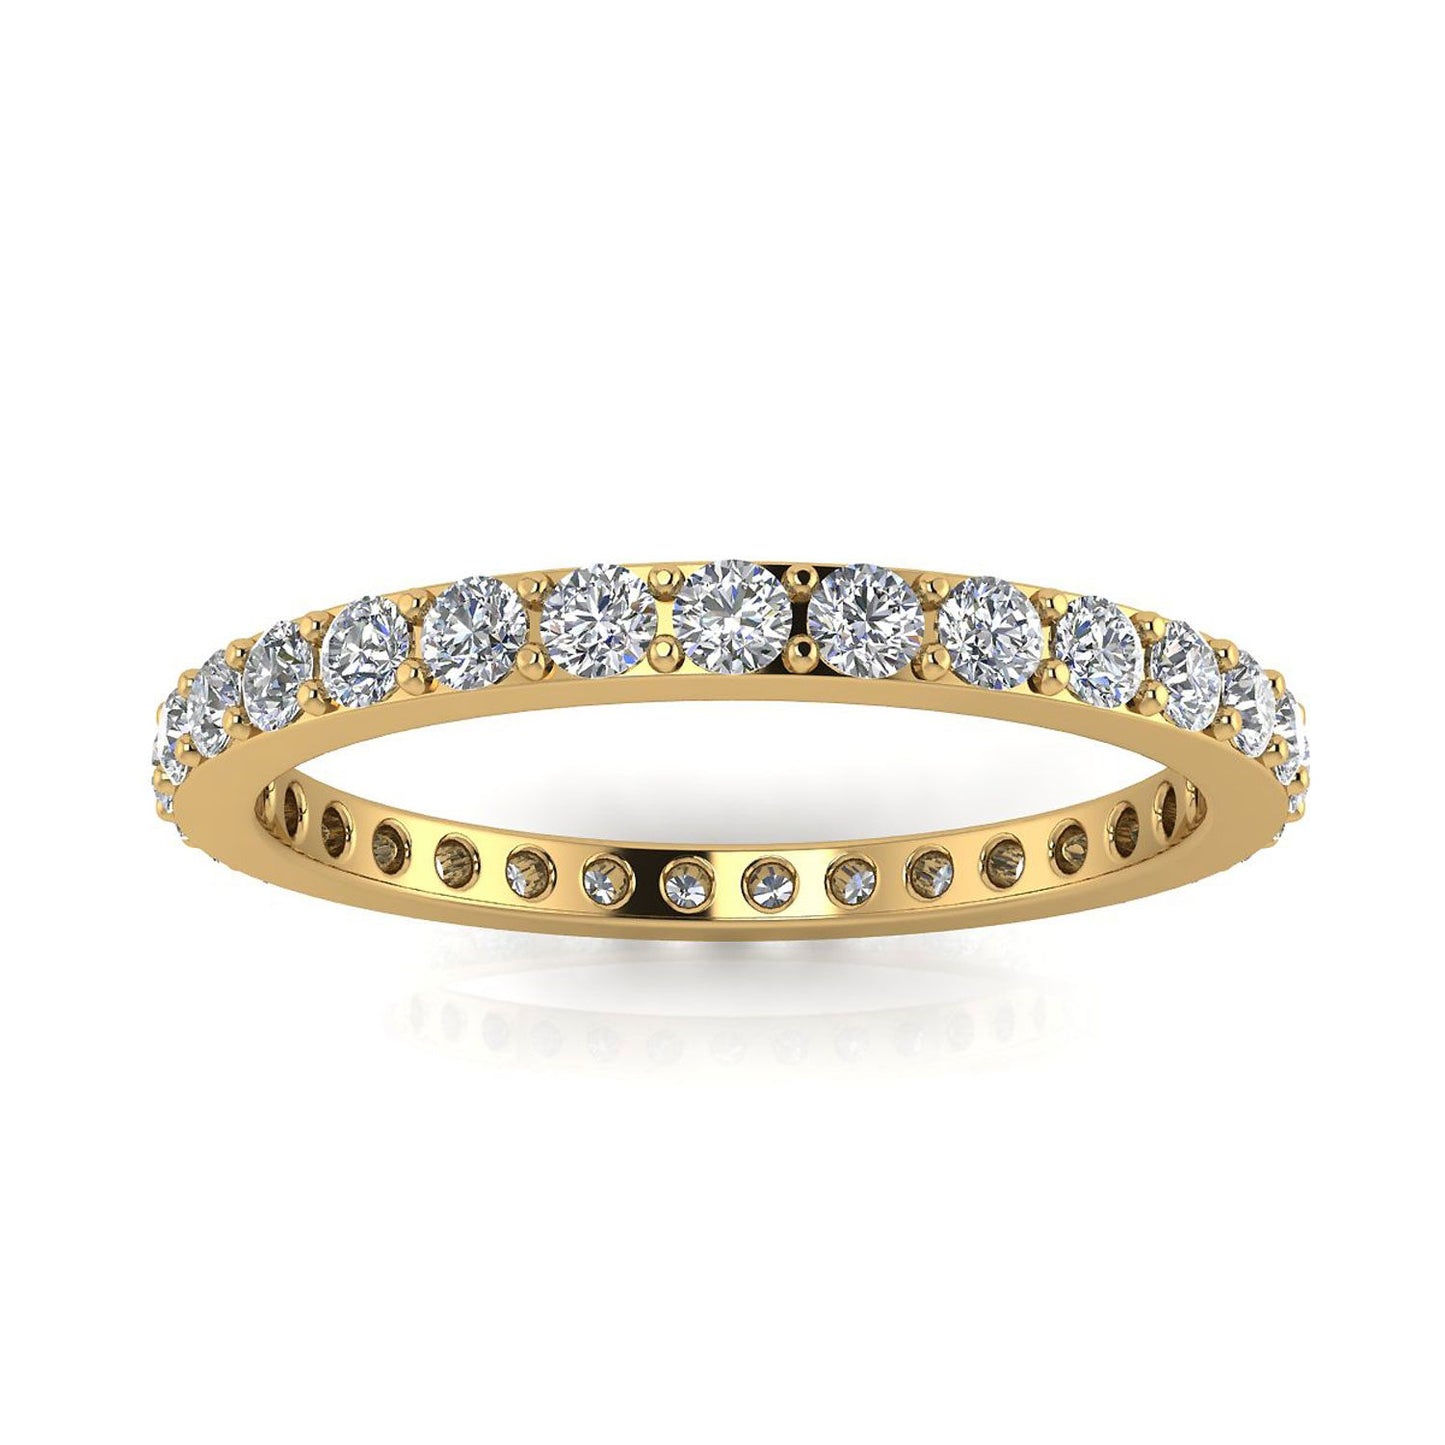 Round Brilliant Cut Diamond Pave Set Eternity Ring In 14k Yellow Gold  (0.72ct. Tw.) Ring Size 7.5